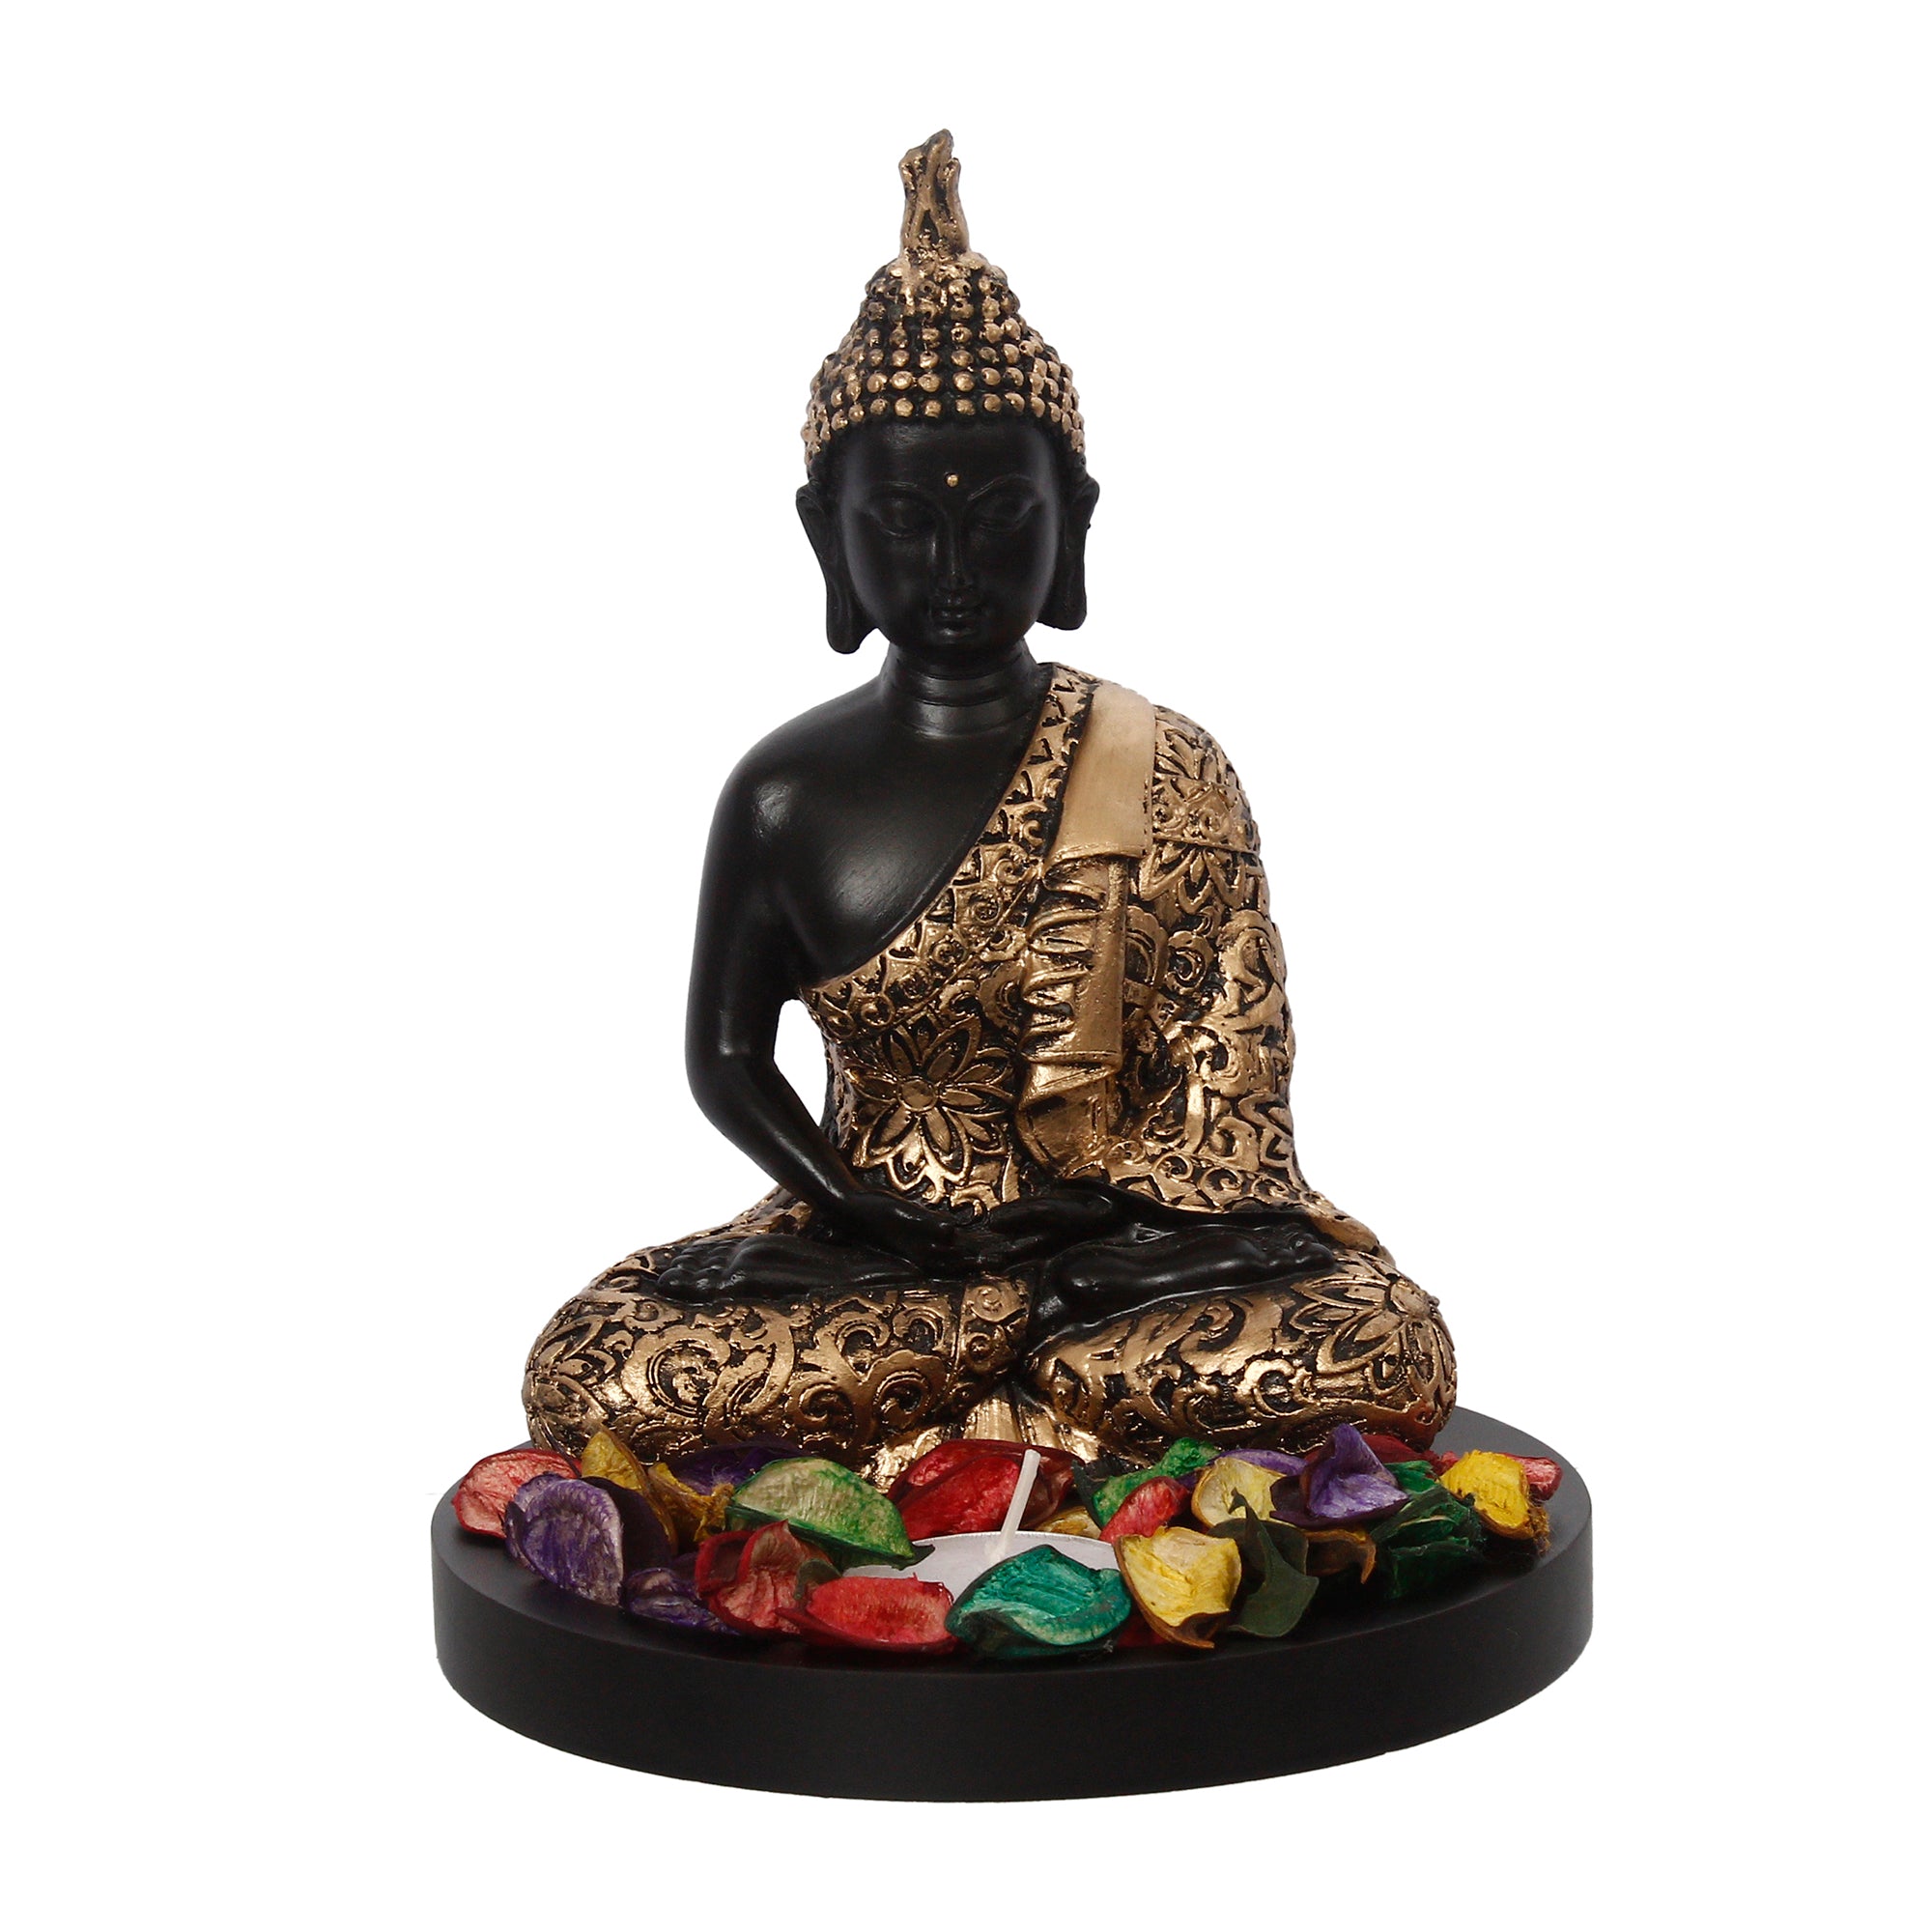 Handcrafted Meditating Golden Buddha Statue with Wooden Base, Fragranced Petals and Tealight 2